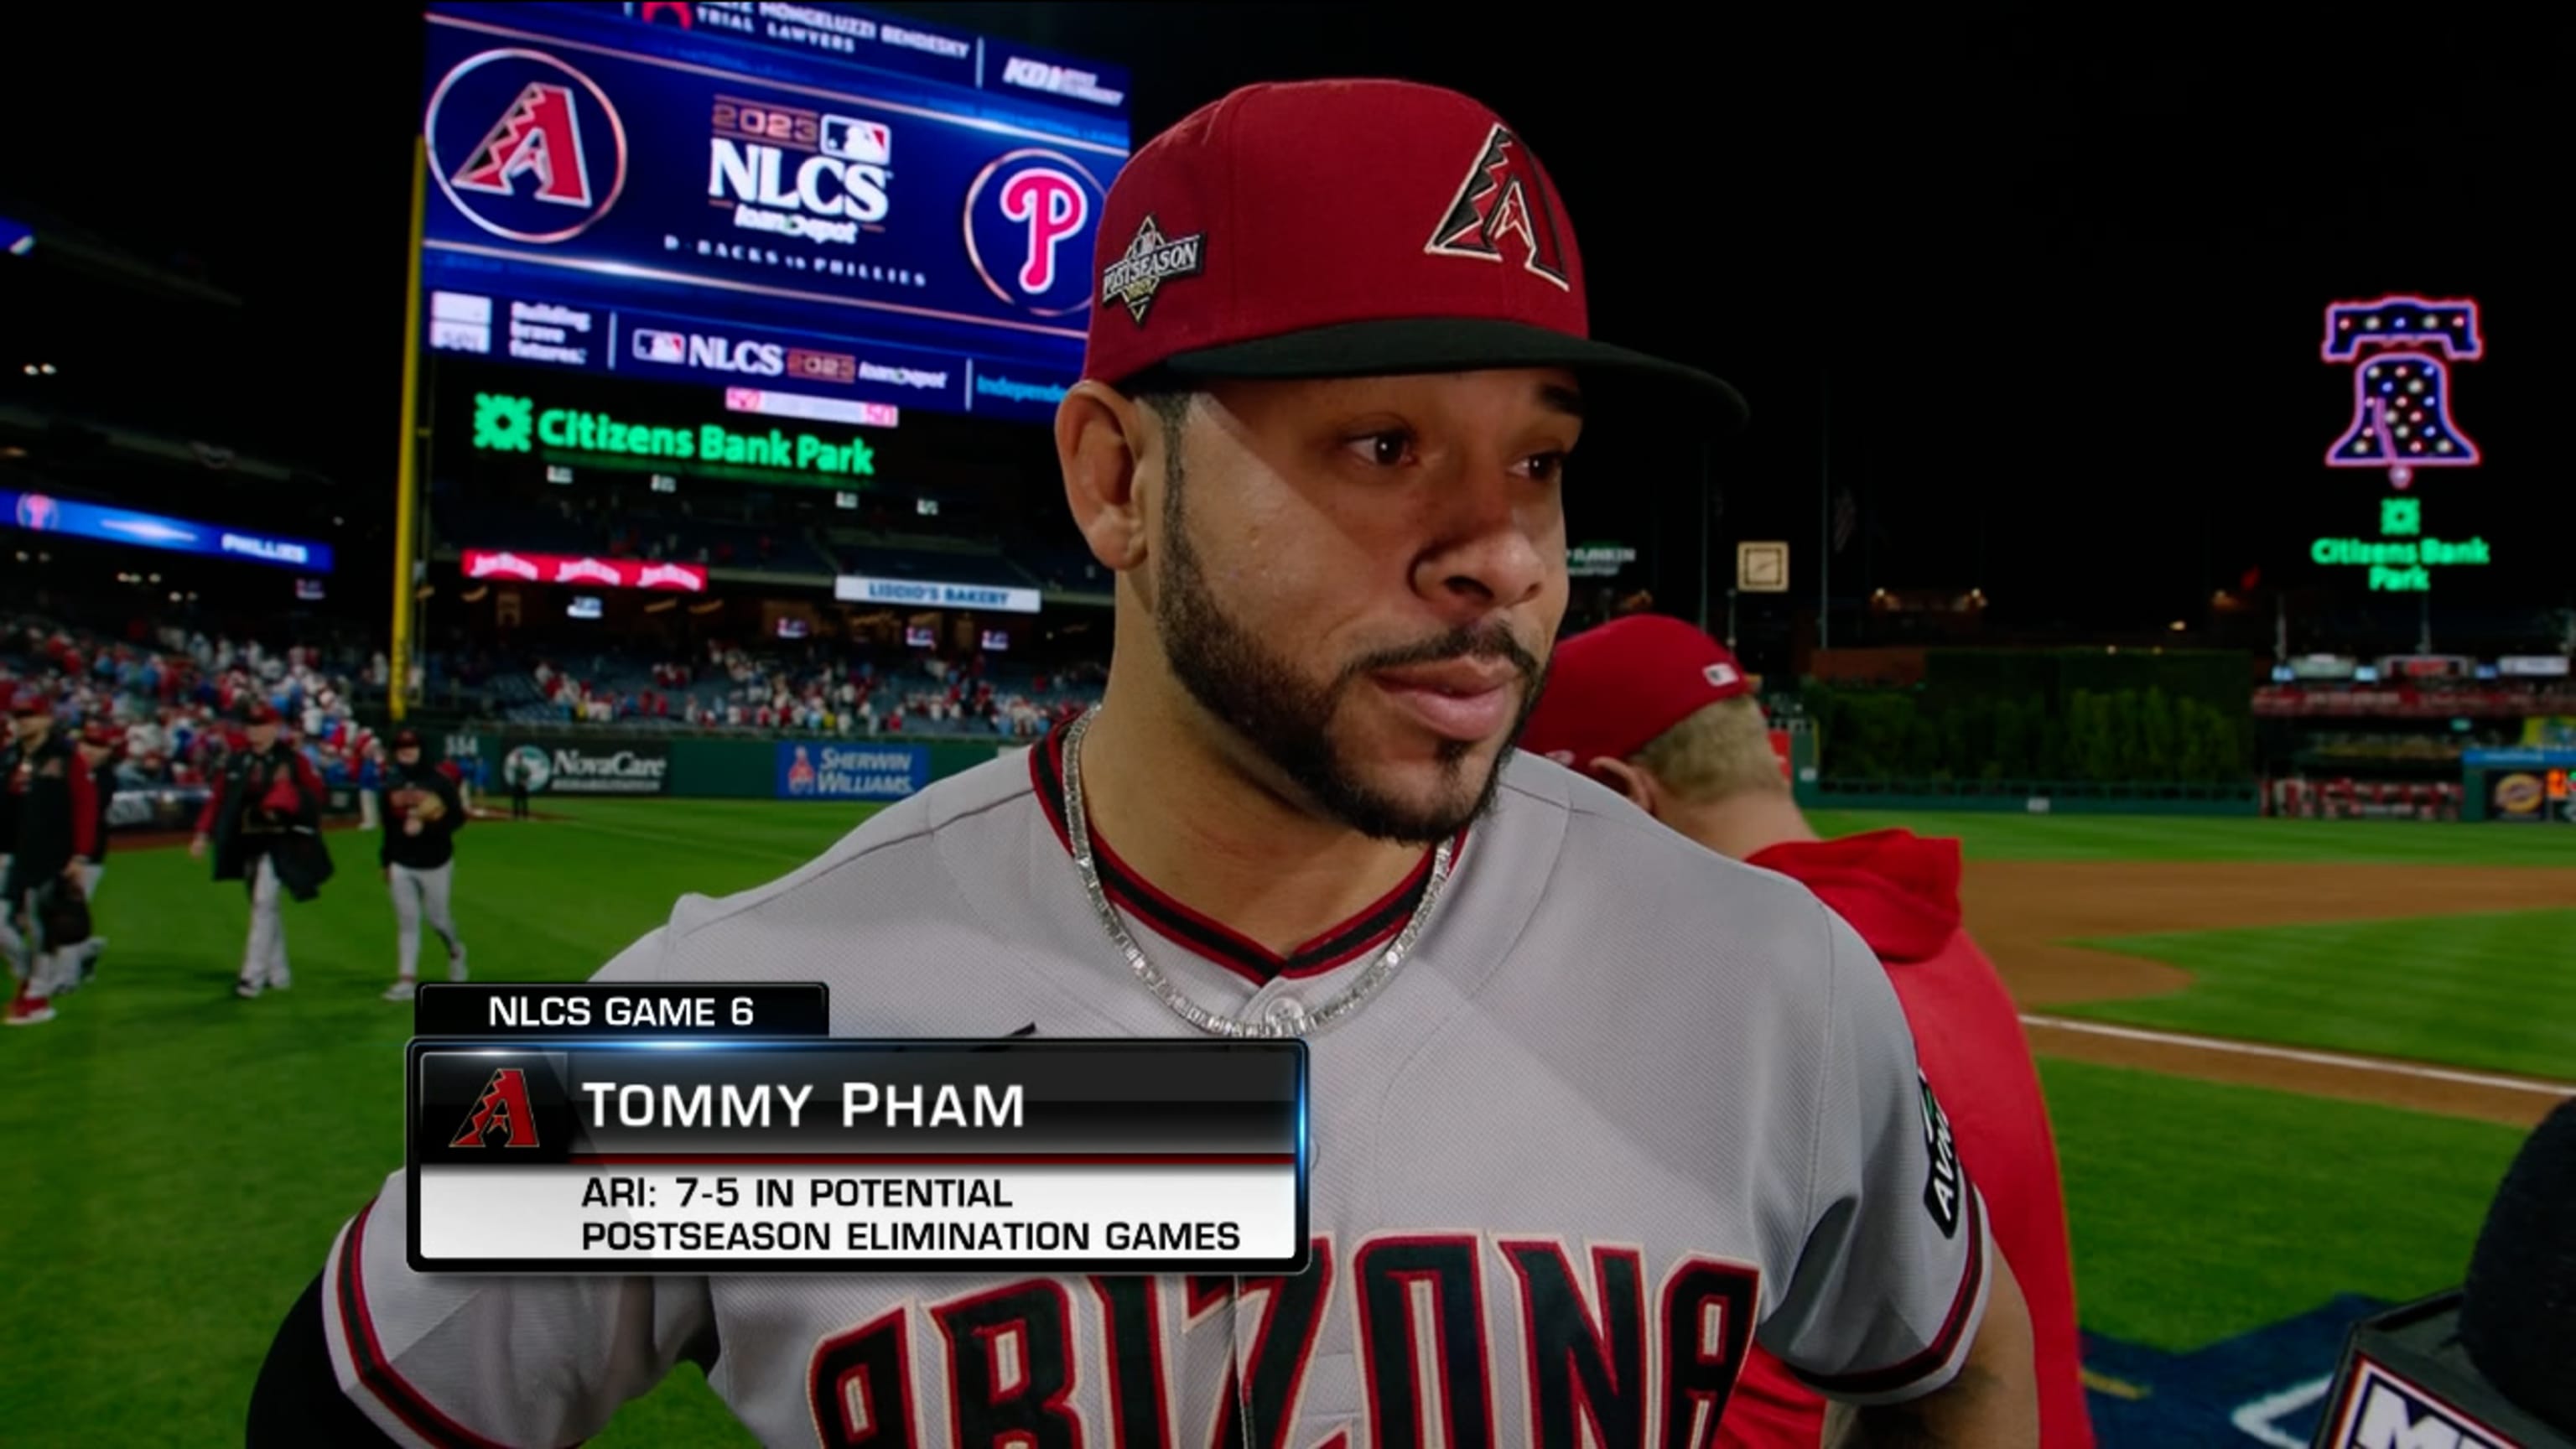 MLB star Tommy Pham claims fan called him a 'piece of s***' in the